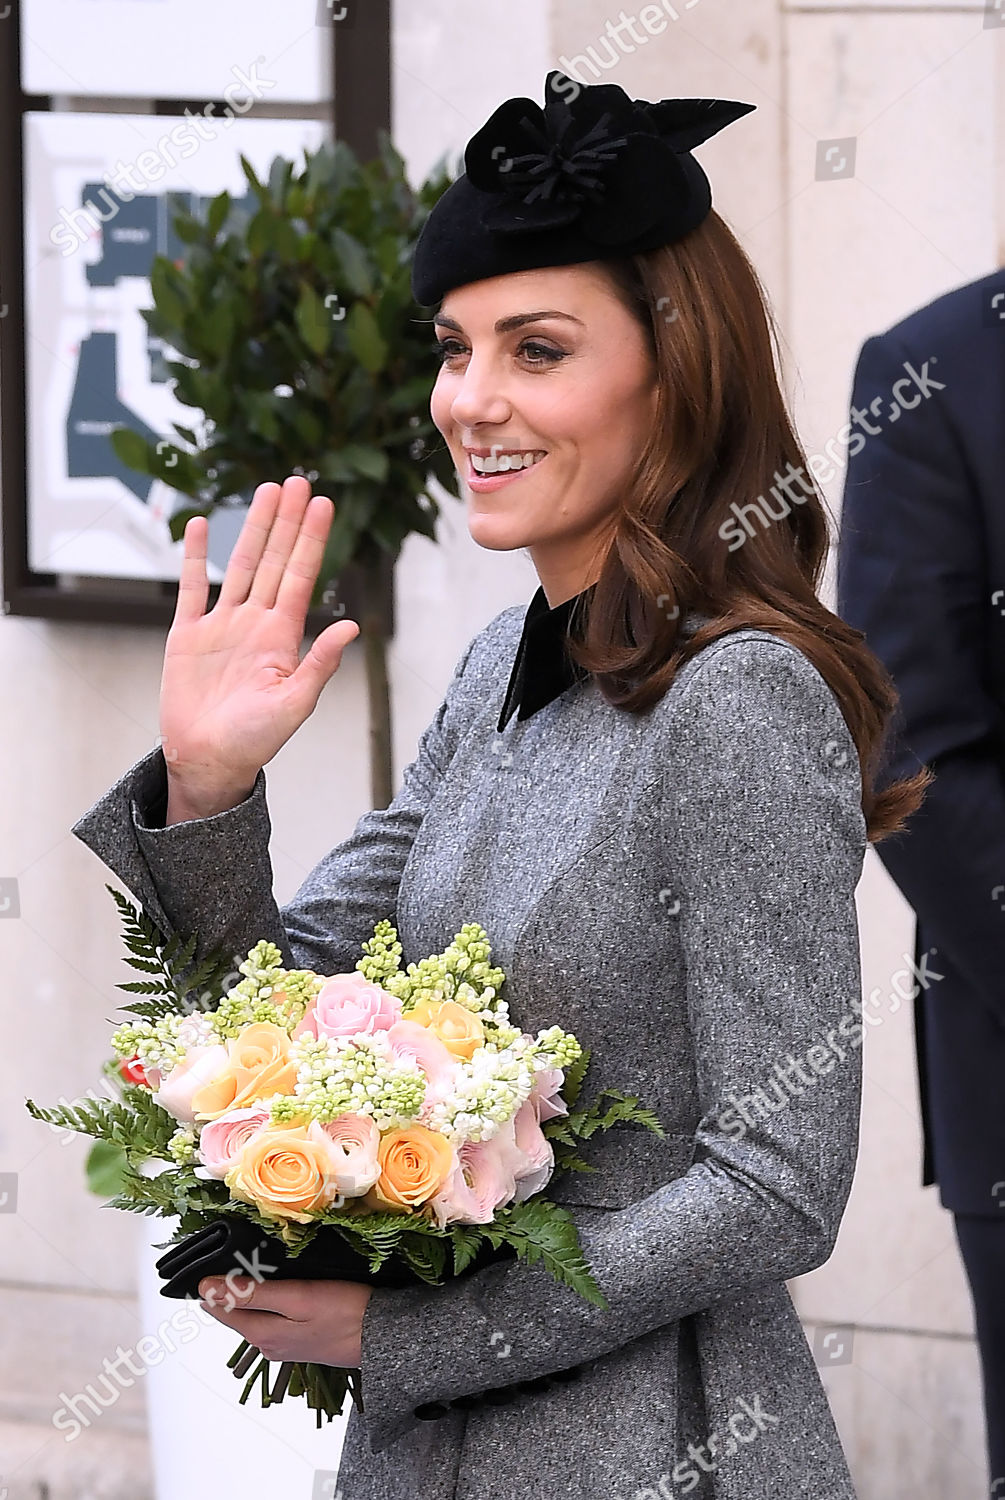 queen-elizabeth-ii-and-catherine-duchess-of-cambridge-visit-kings-college-to-open-bush-house-london-uk-shutterstock-editorial-10159785ay.jpg